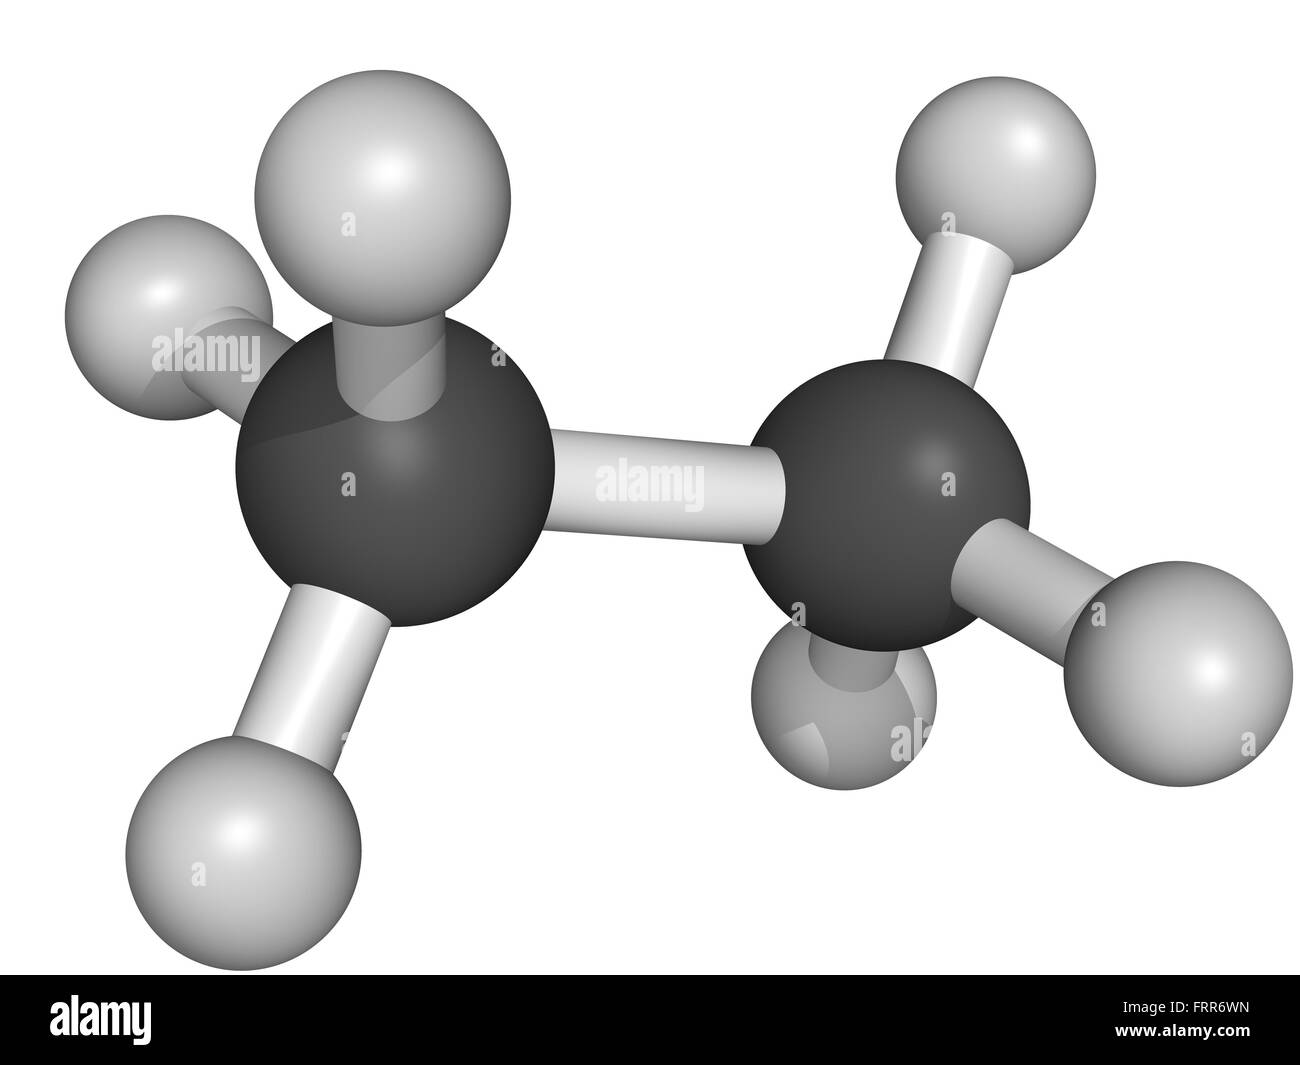 ethane natural gas component isolated on white, molecular model Stock Photo